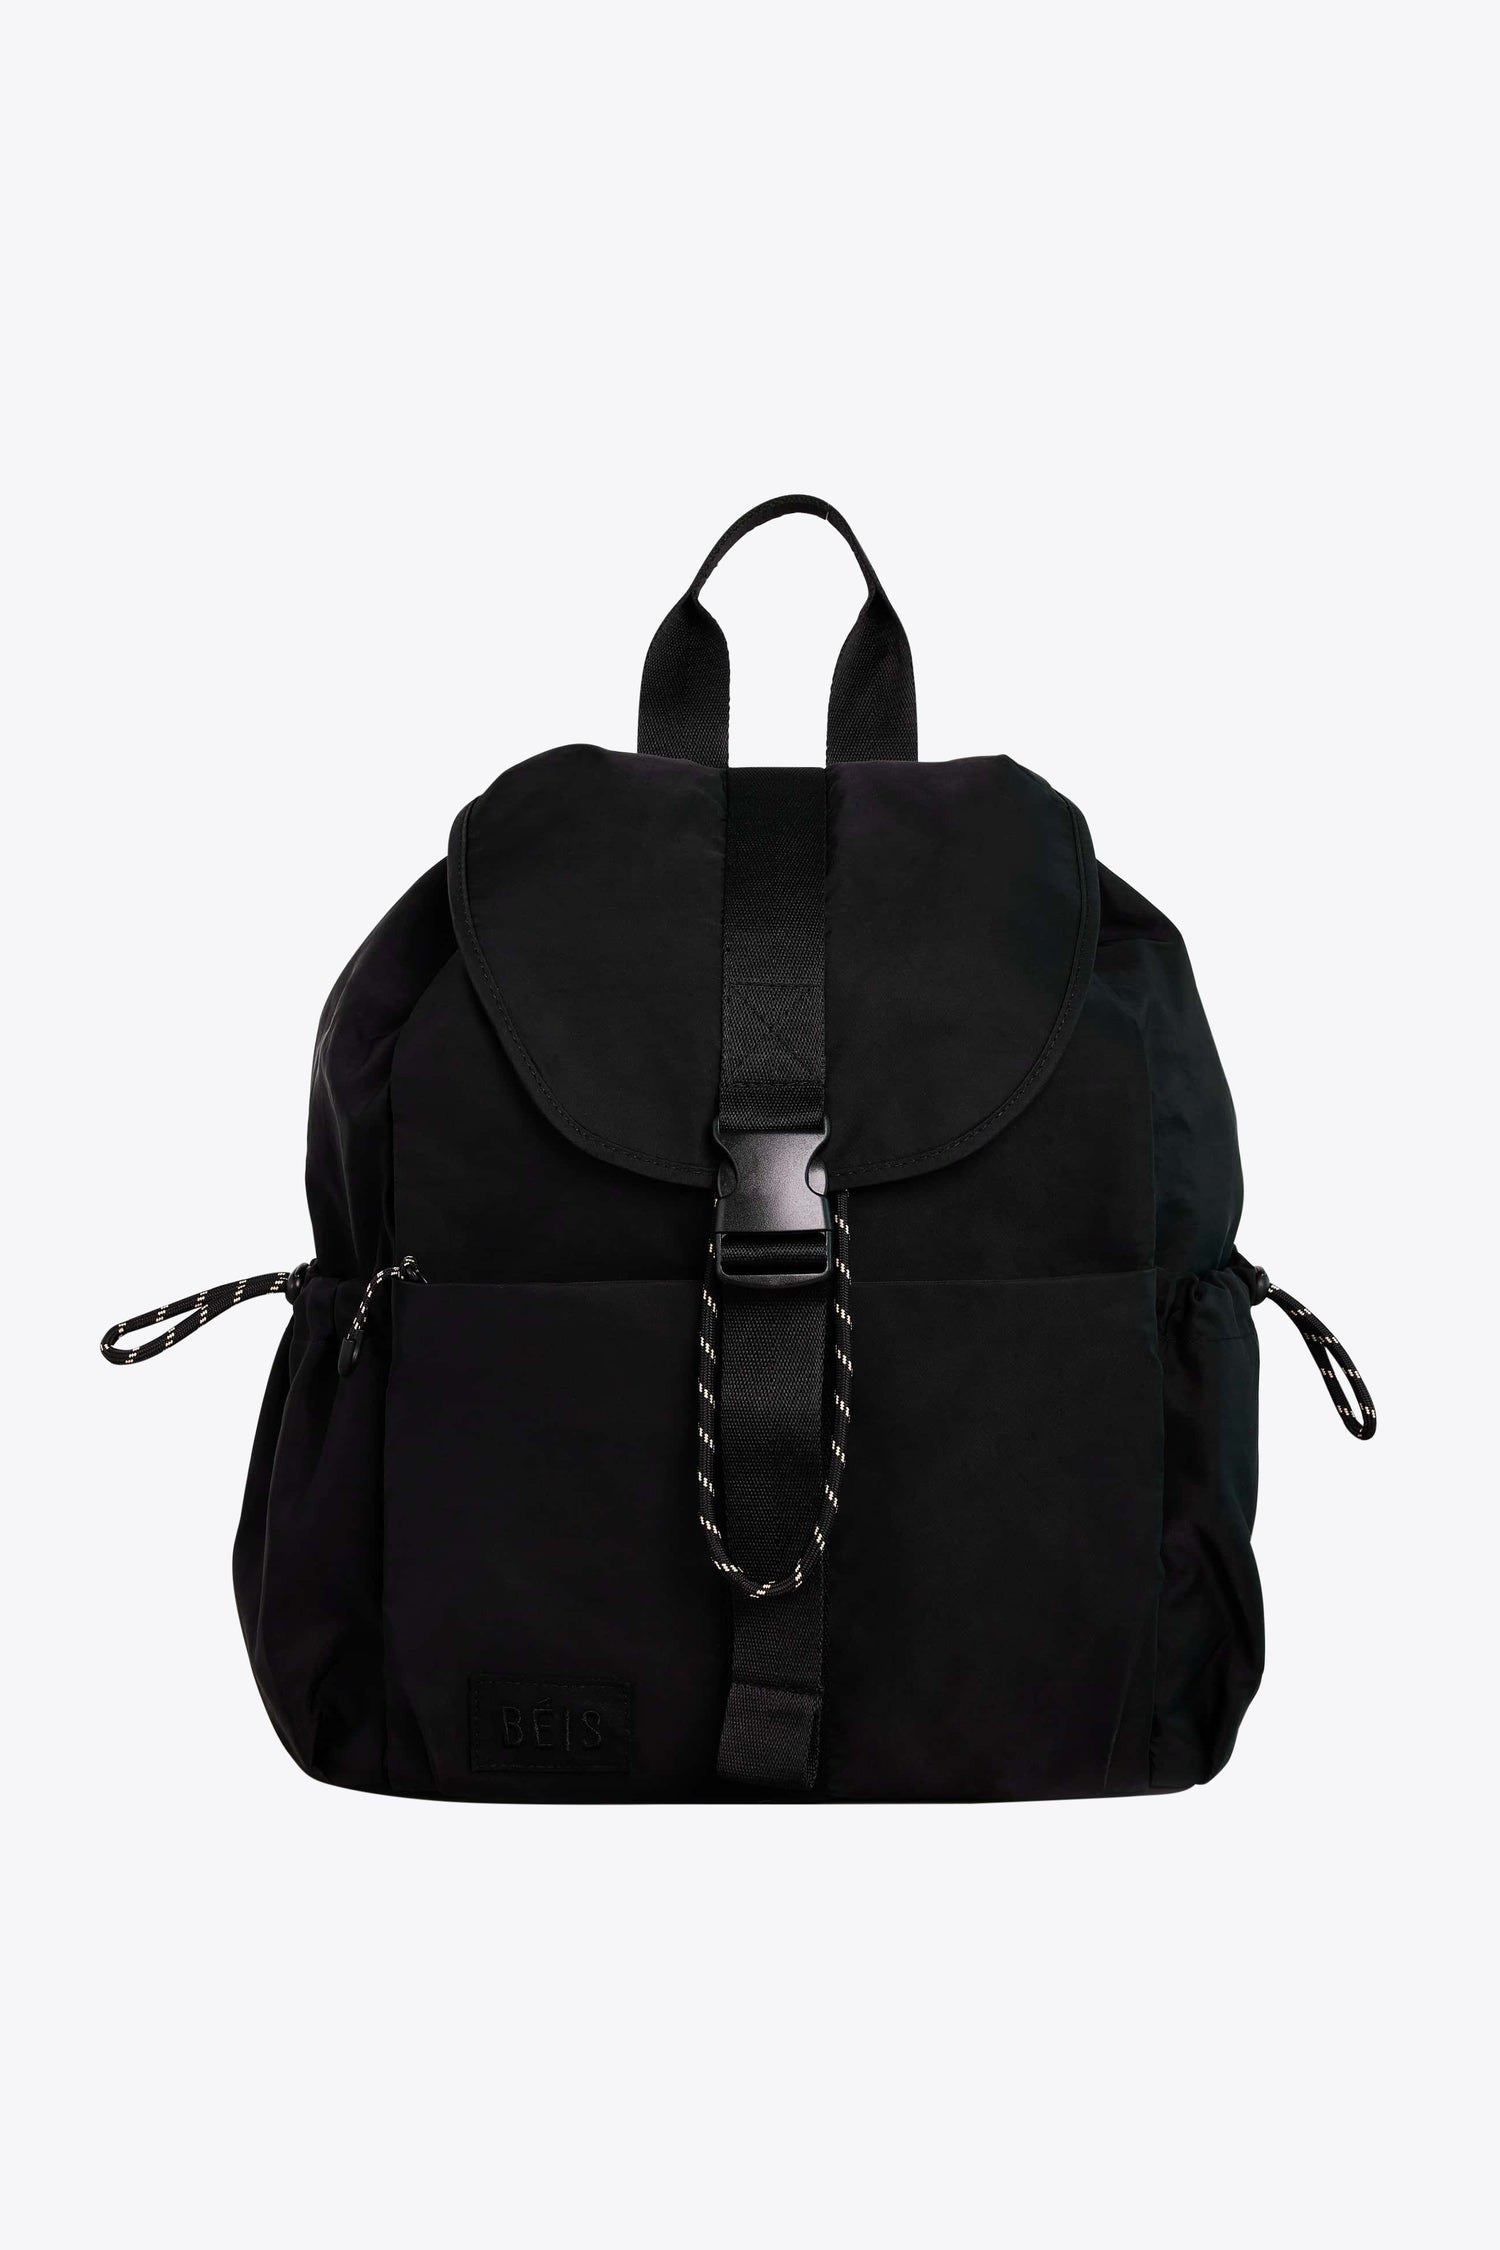 The Sport Backpack Colors